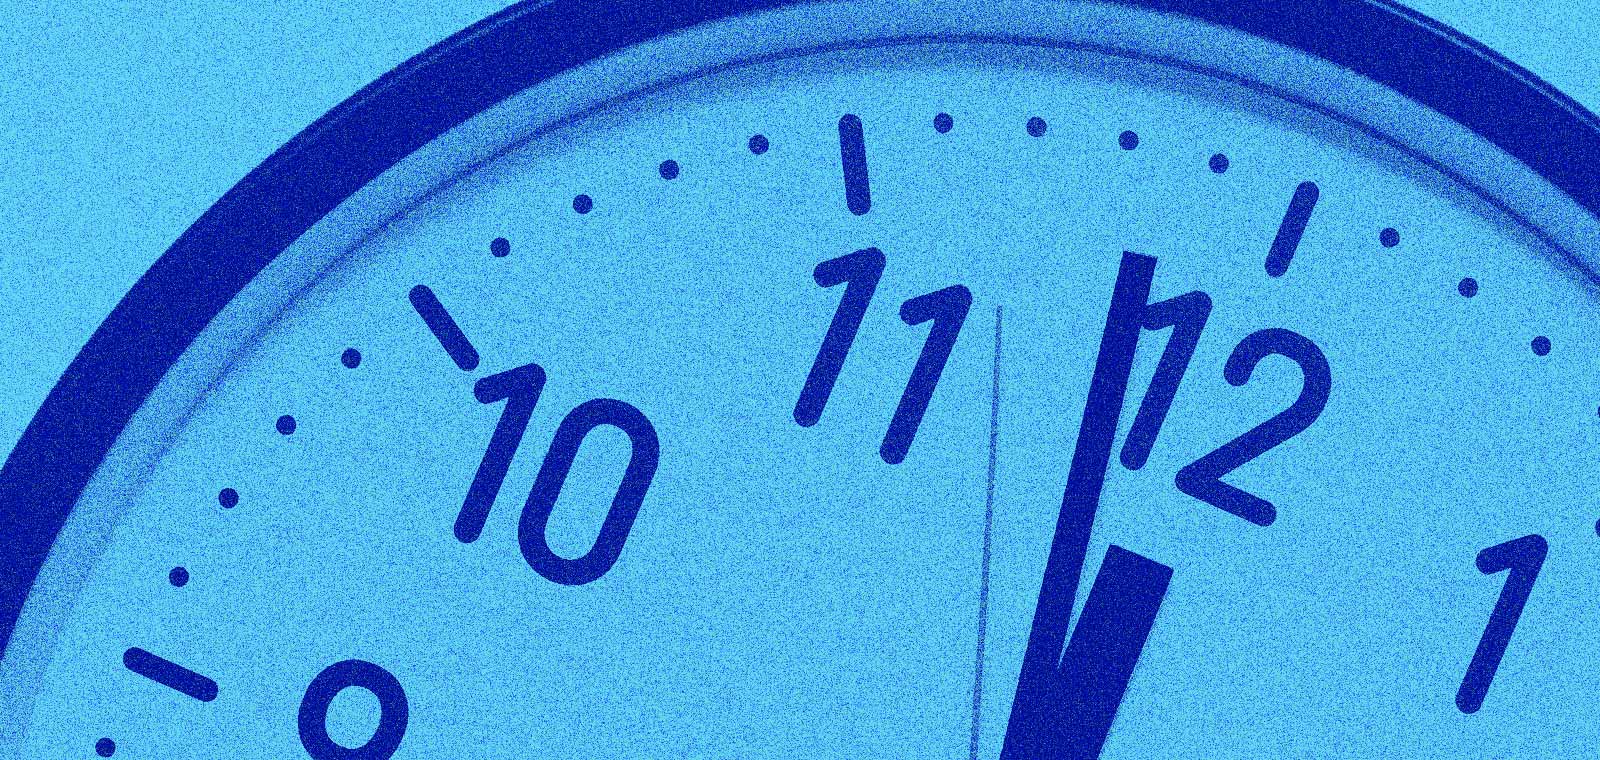 Brexit Negotiations: One Minute to Midnight